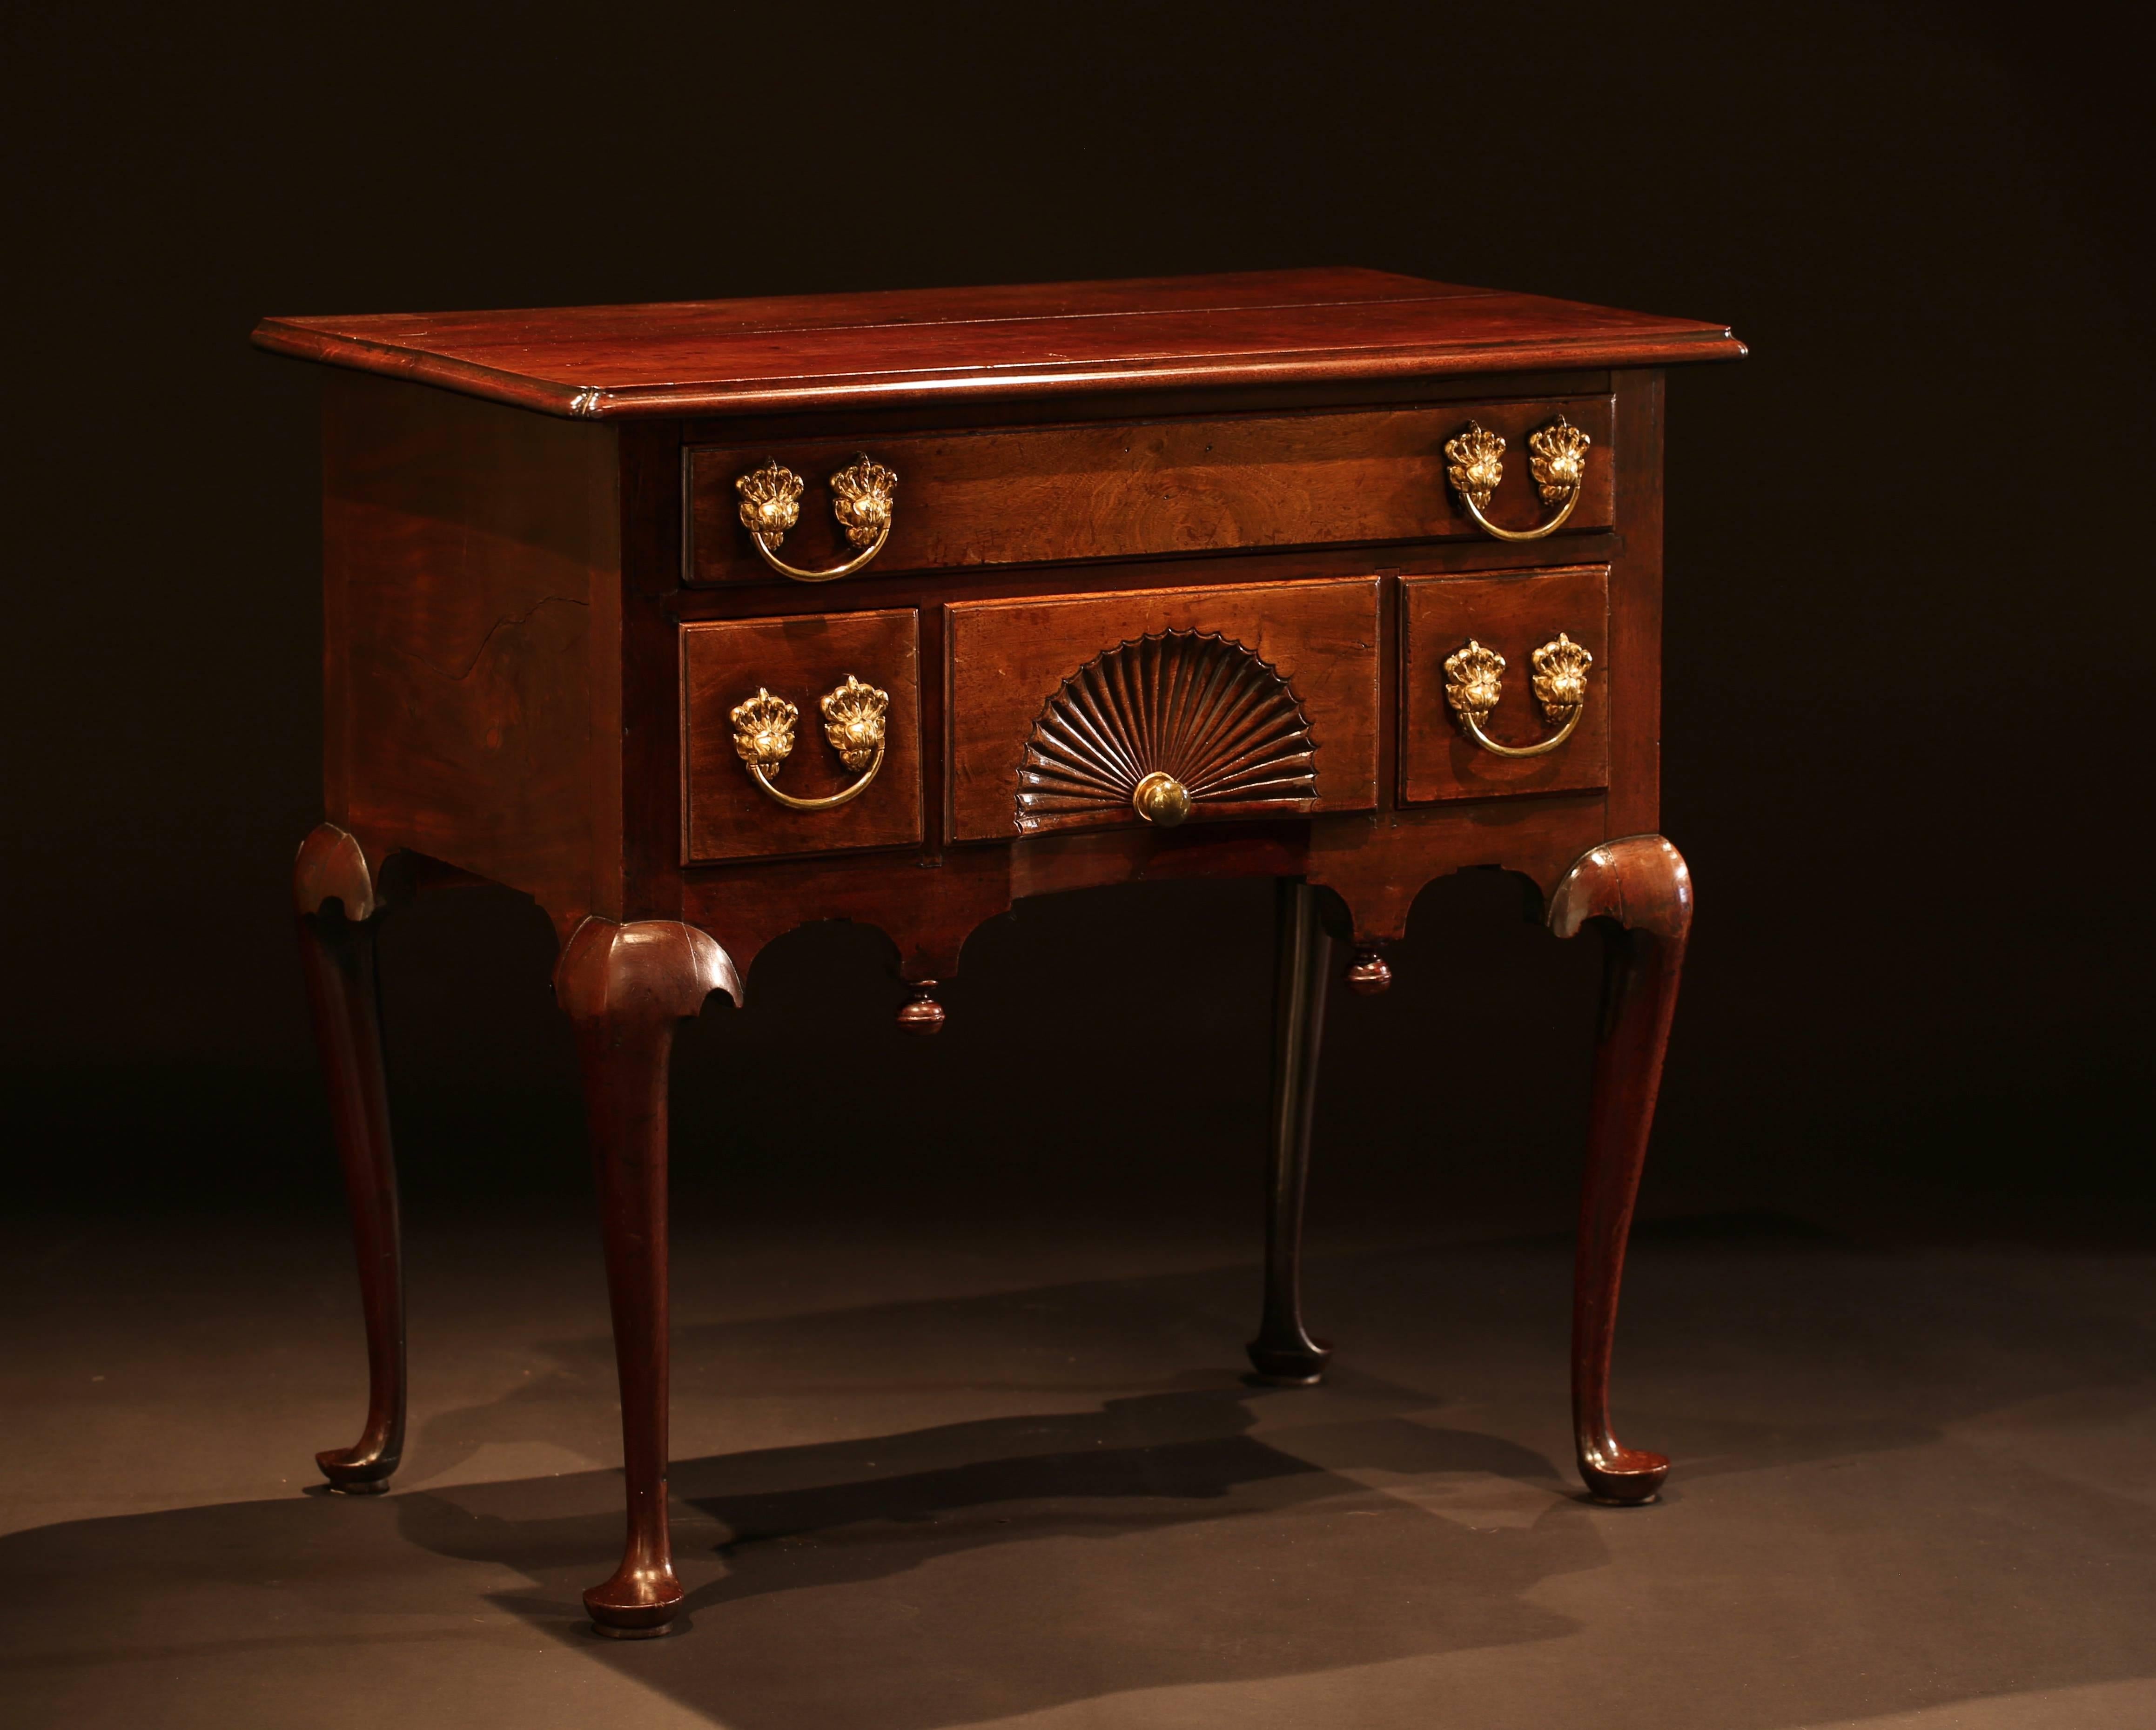 A very well proportioned 18th century Cuban mahogany lowboy, New England, circa 1720-1750.
With a two plank rectangular moulded edged top with 